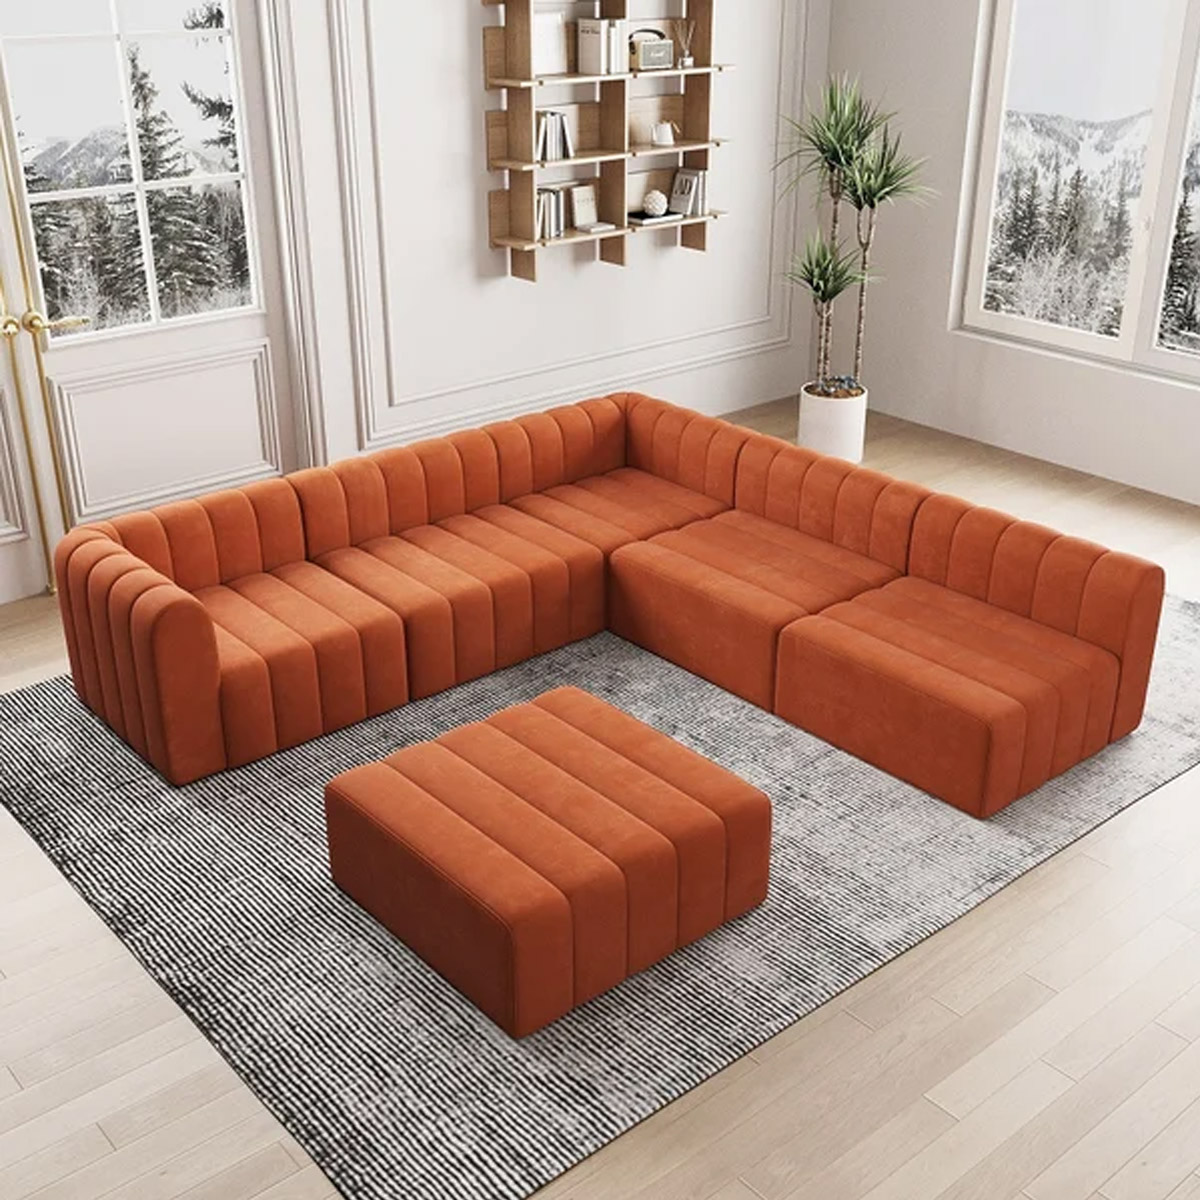 Chelsea Channel Velvet Modular Sectional Sofa Set Convertible 6 Seater Orange From Aed 7749 Atoz Furniture